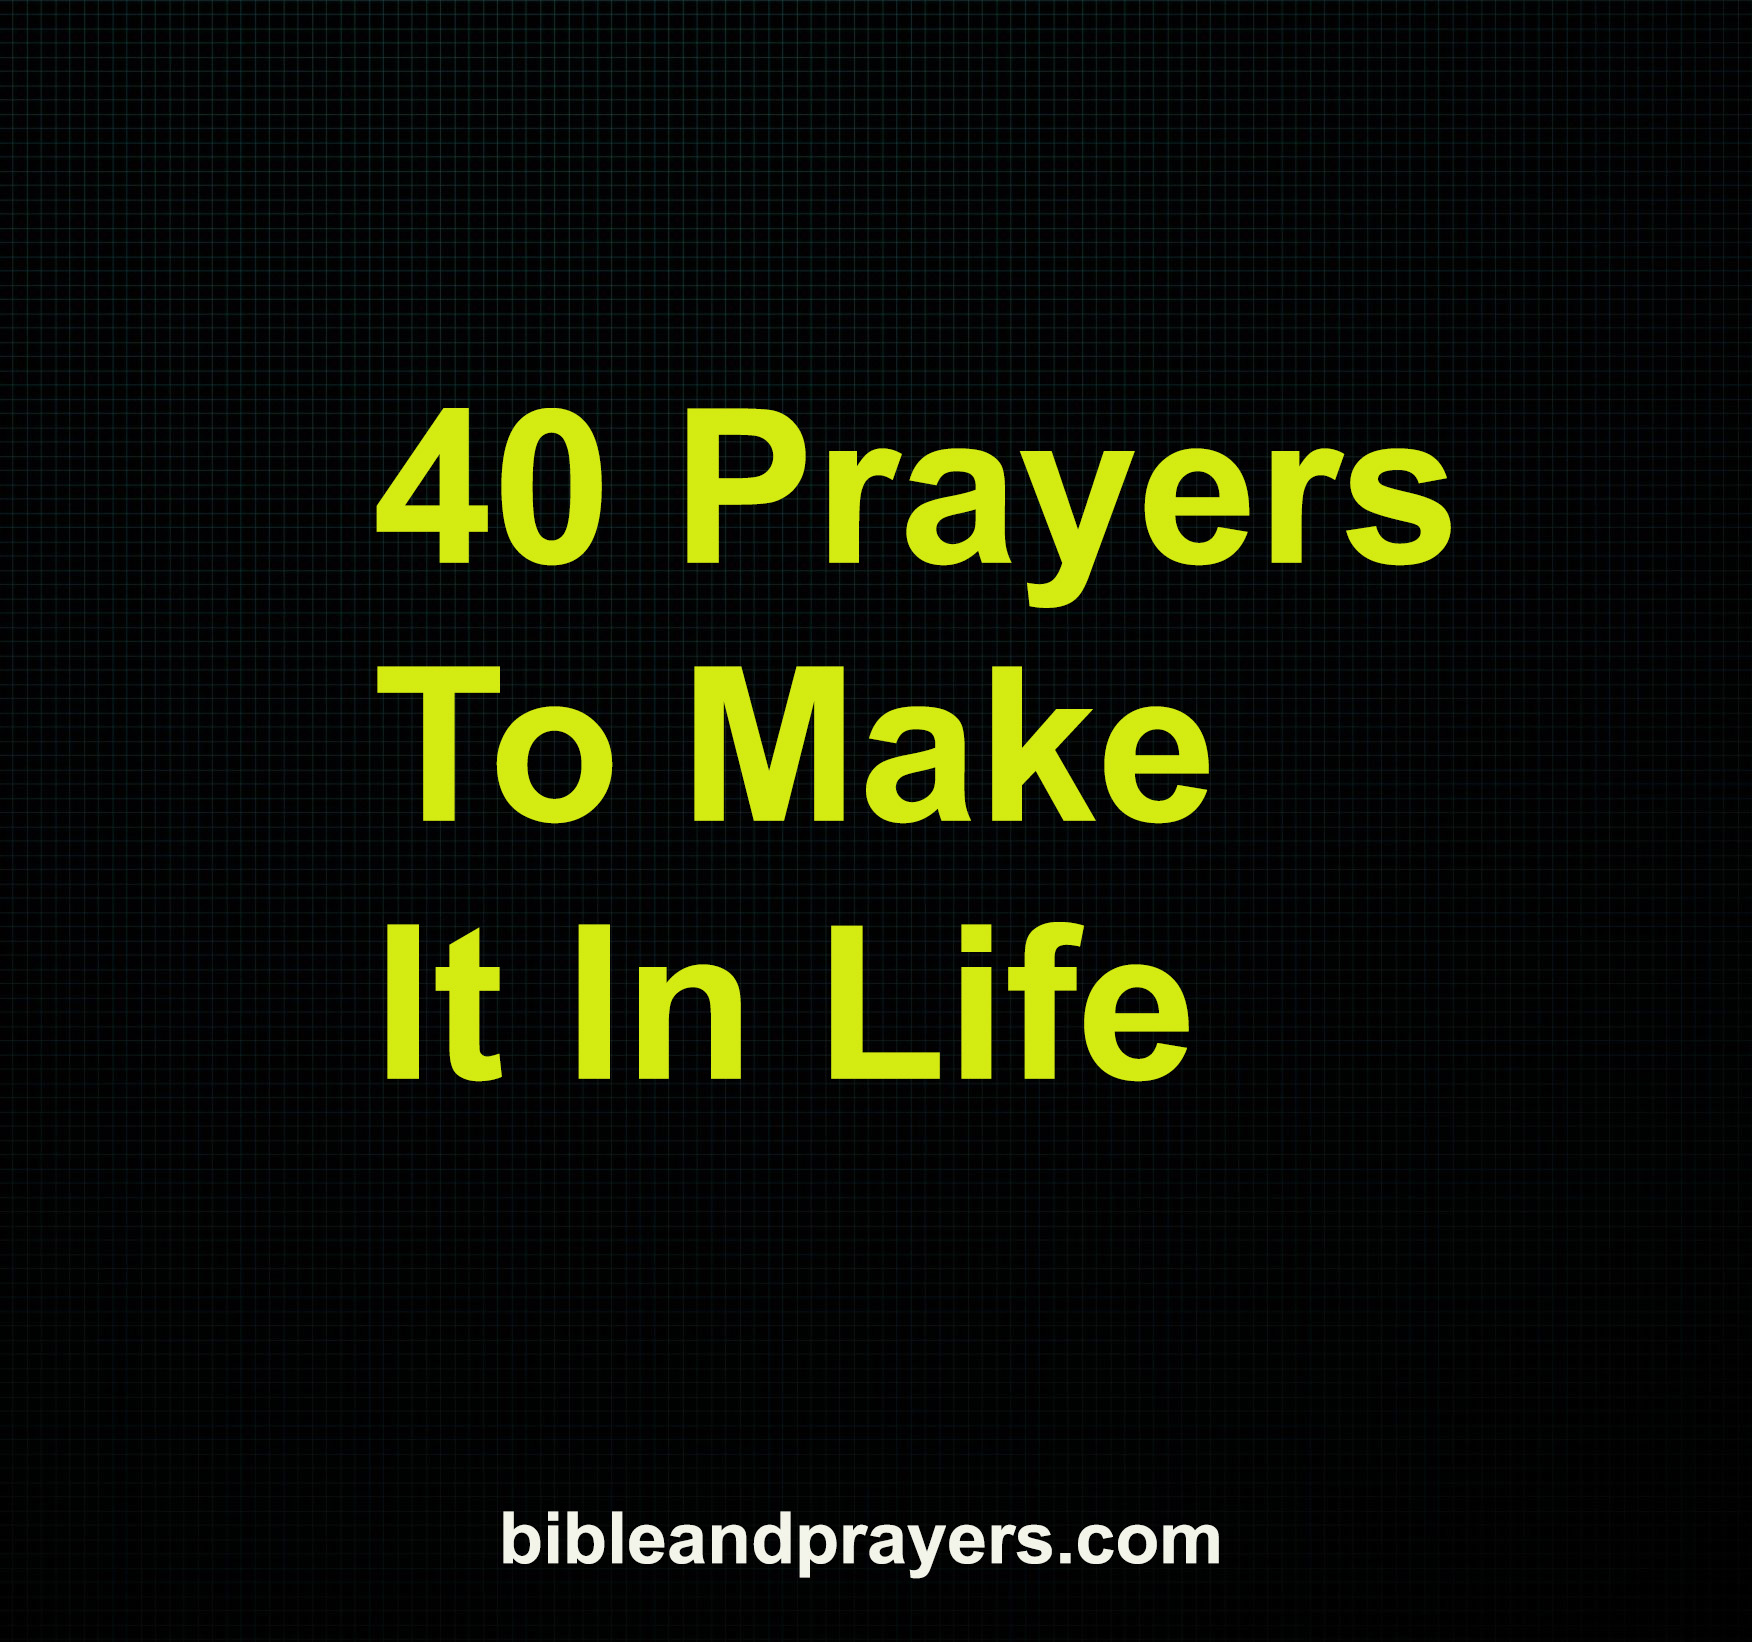 40 Prayers To Make It In Life